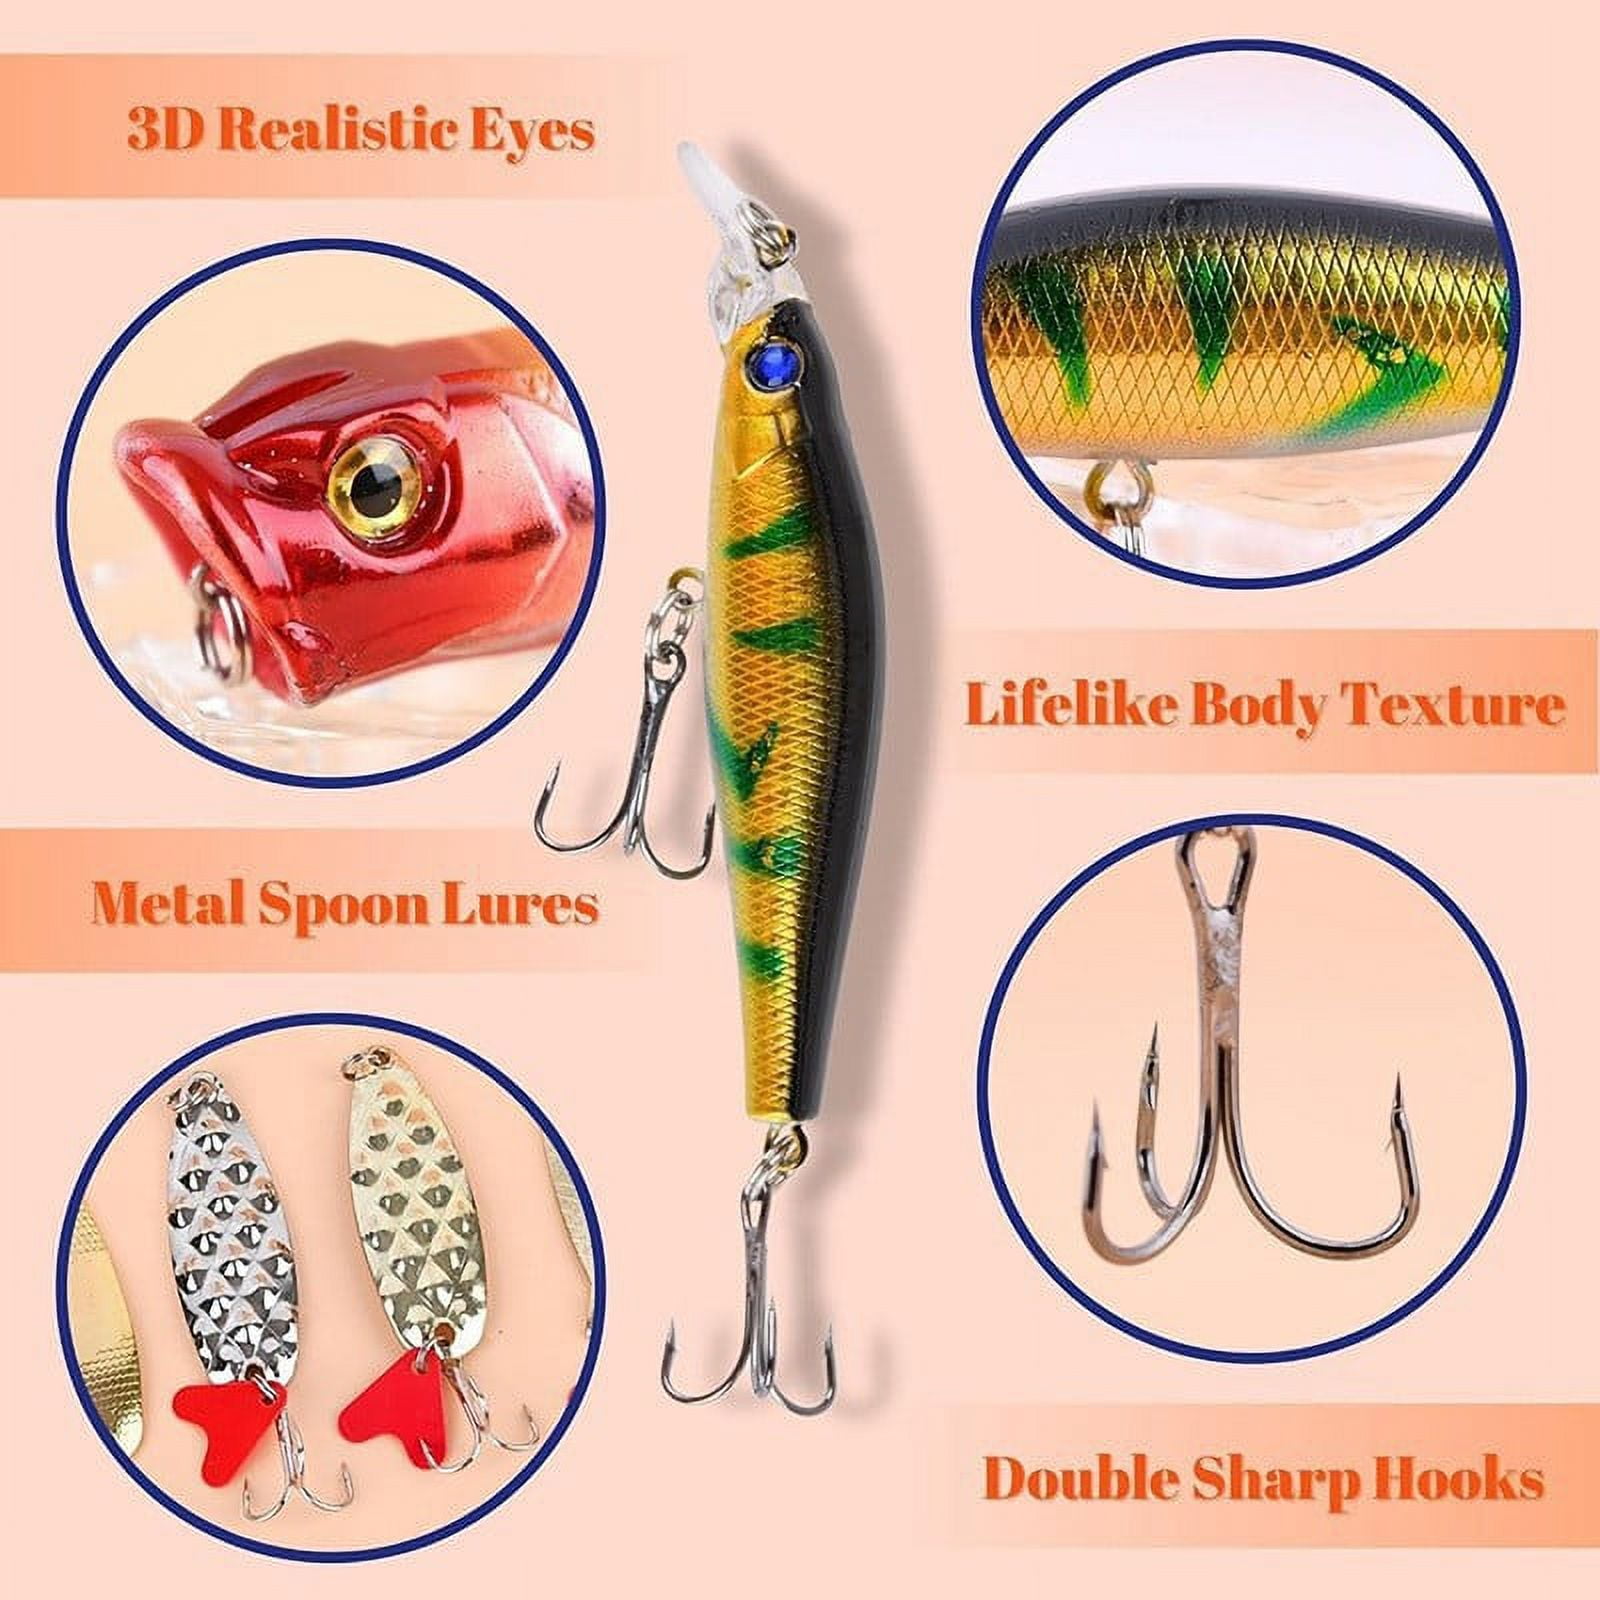 Apmemiss Gifts for Dad Clearance 10CM Sea Fishing Simulation Bait 15G Hard  Bait Christmas Gift for Fishing Enthusiasts Overstock Items Clearance All